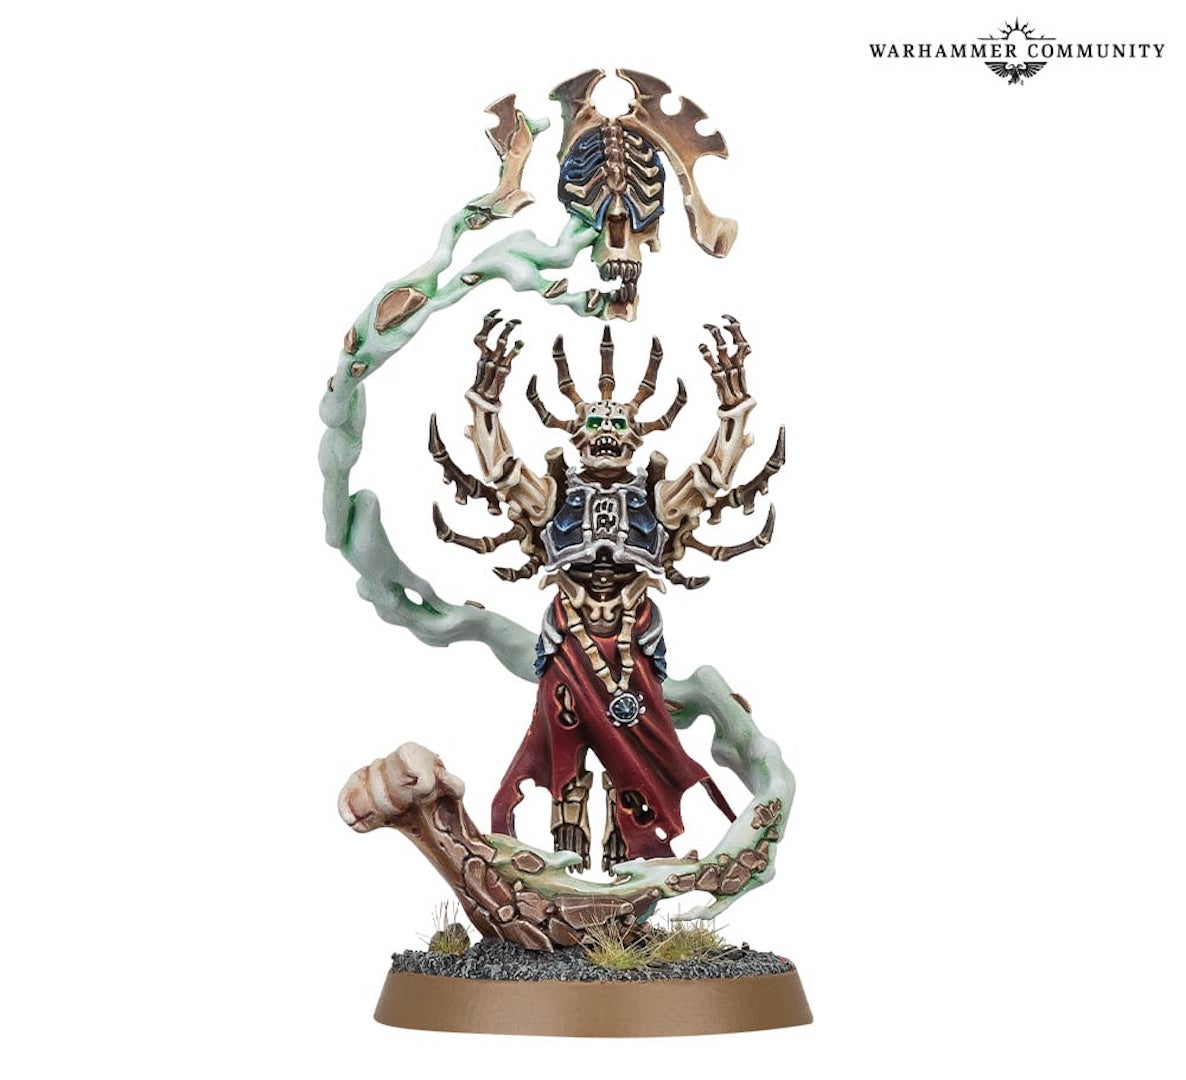 An image of the Warhammer Age of Sigmar Ossiarch Bonereapers model